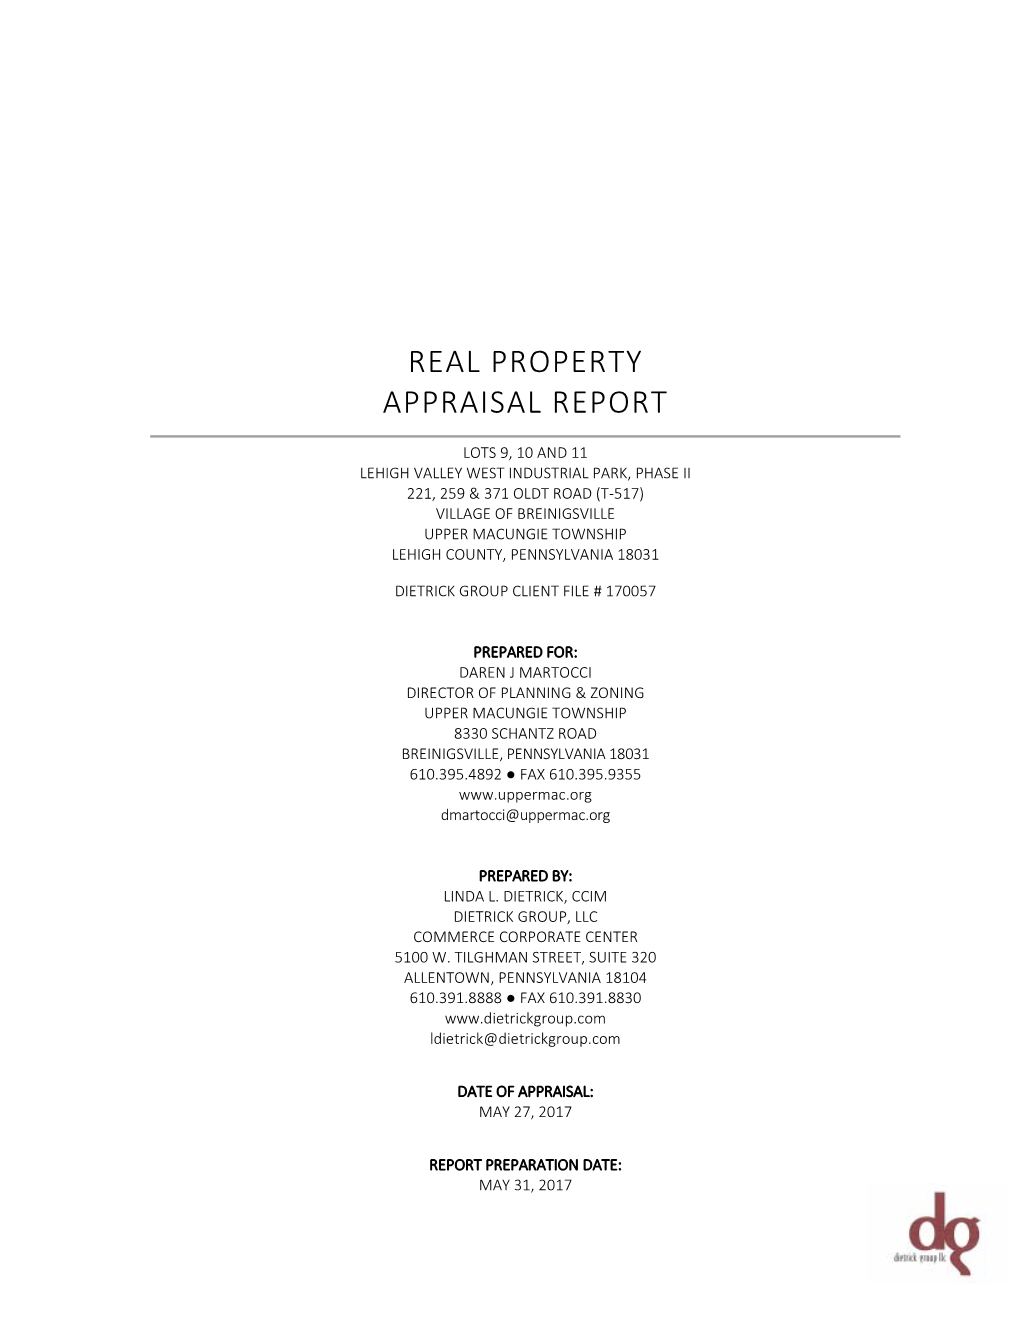 Real Property Appraisal Report